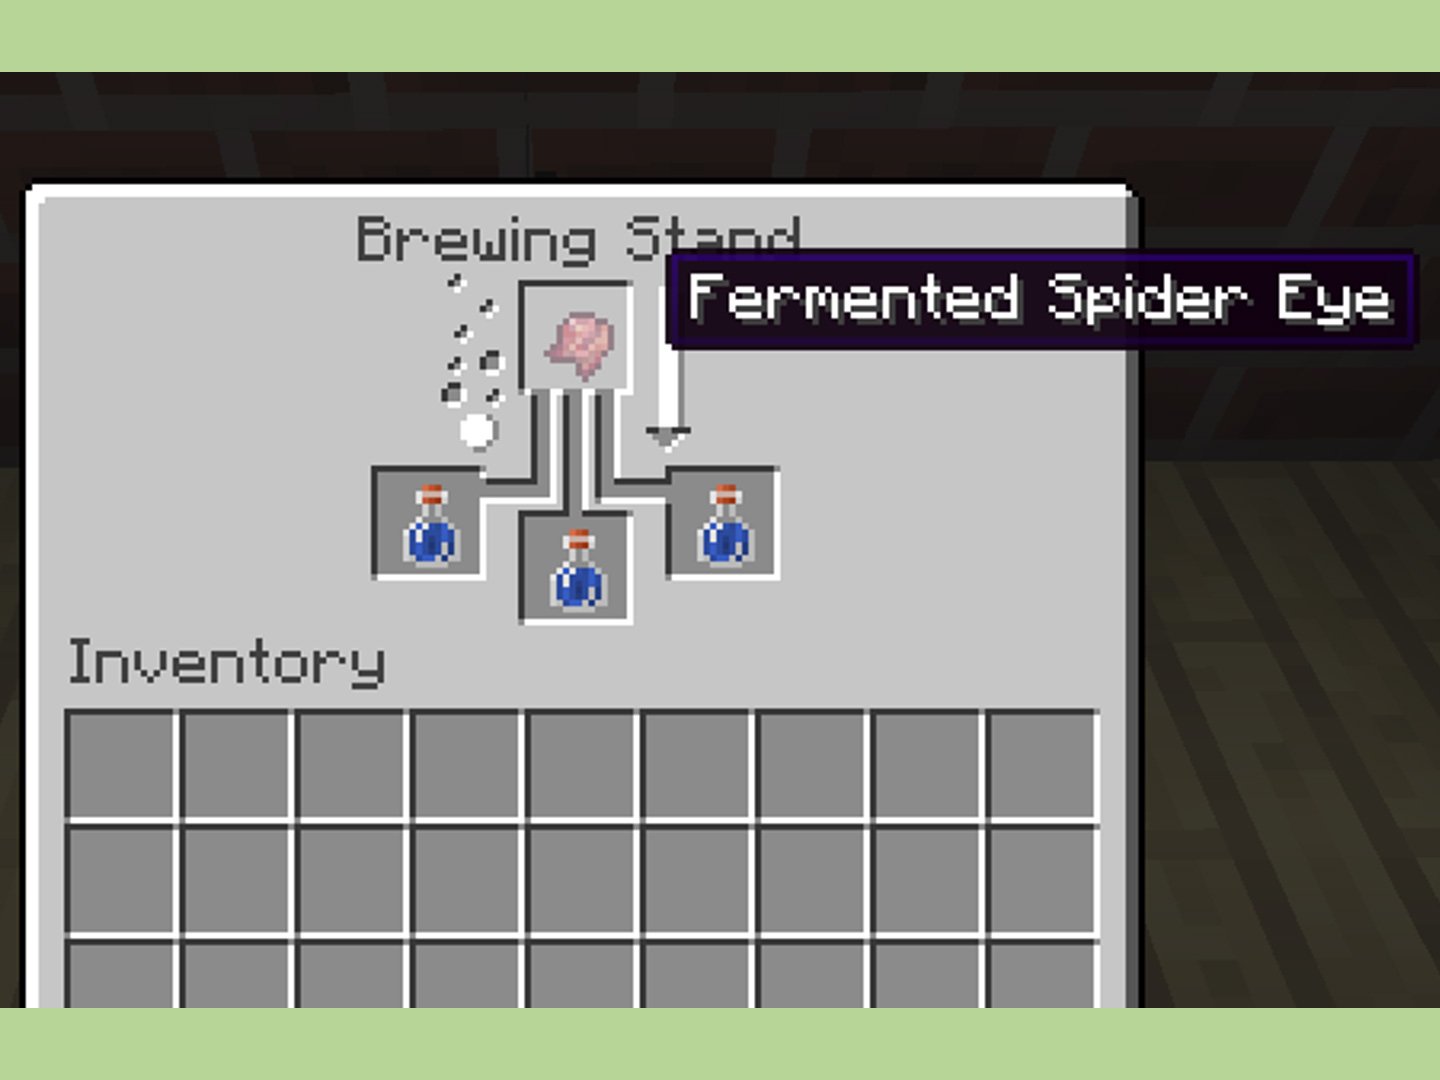 How to Make Fermented Spider Eye in Minecraft: 8 Steps